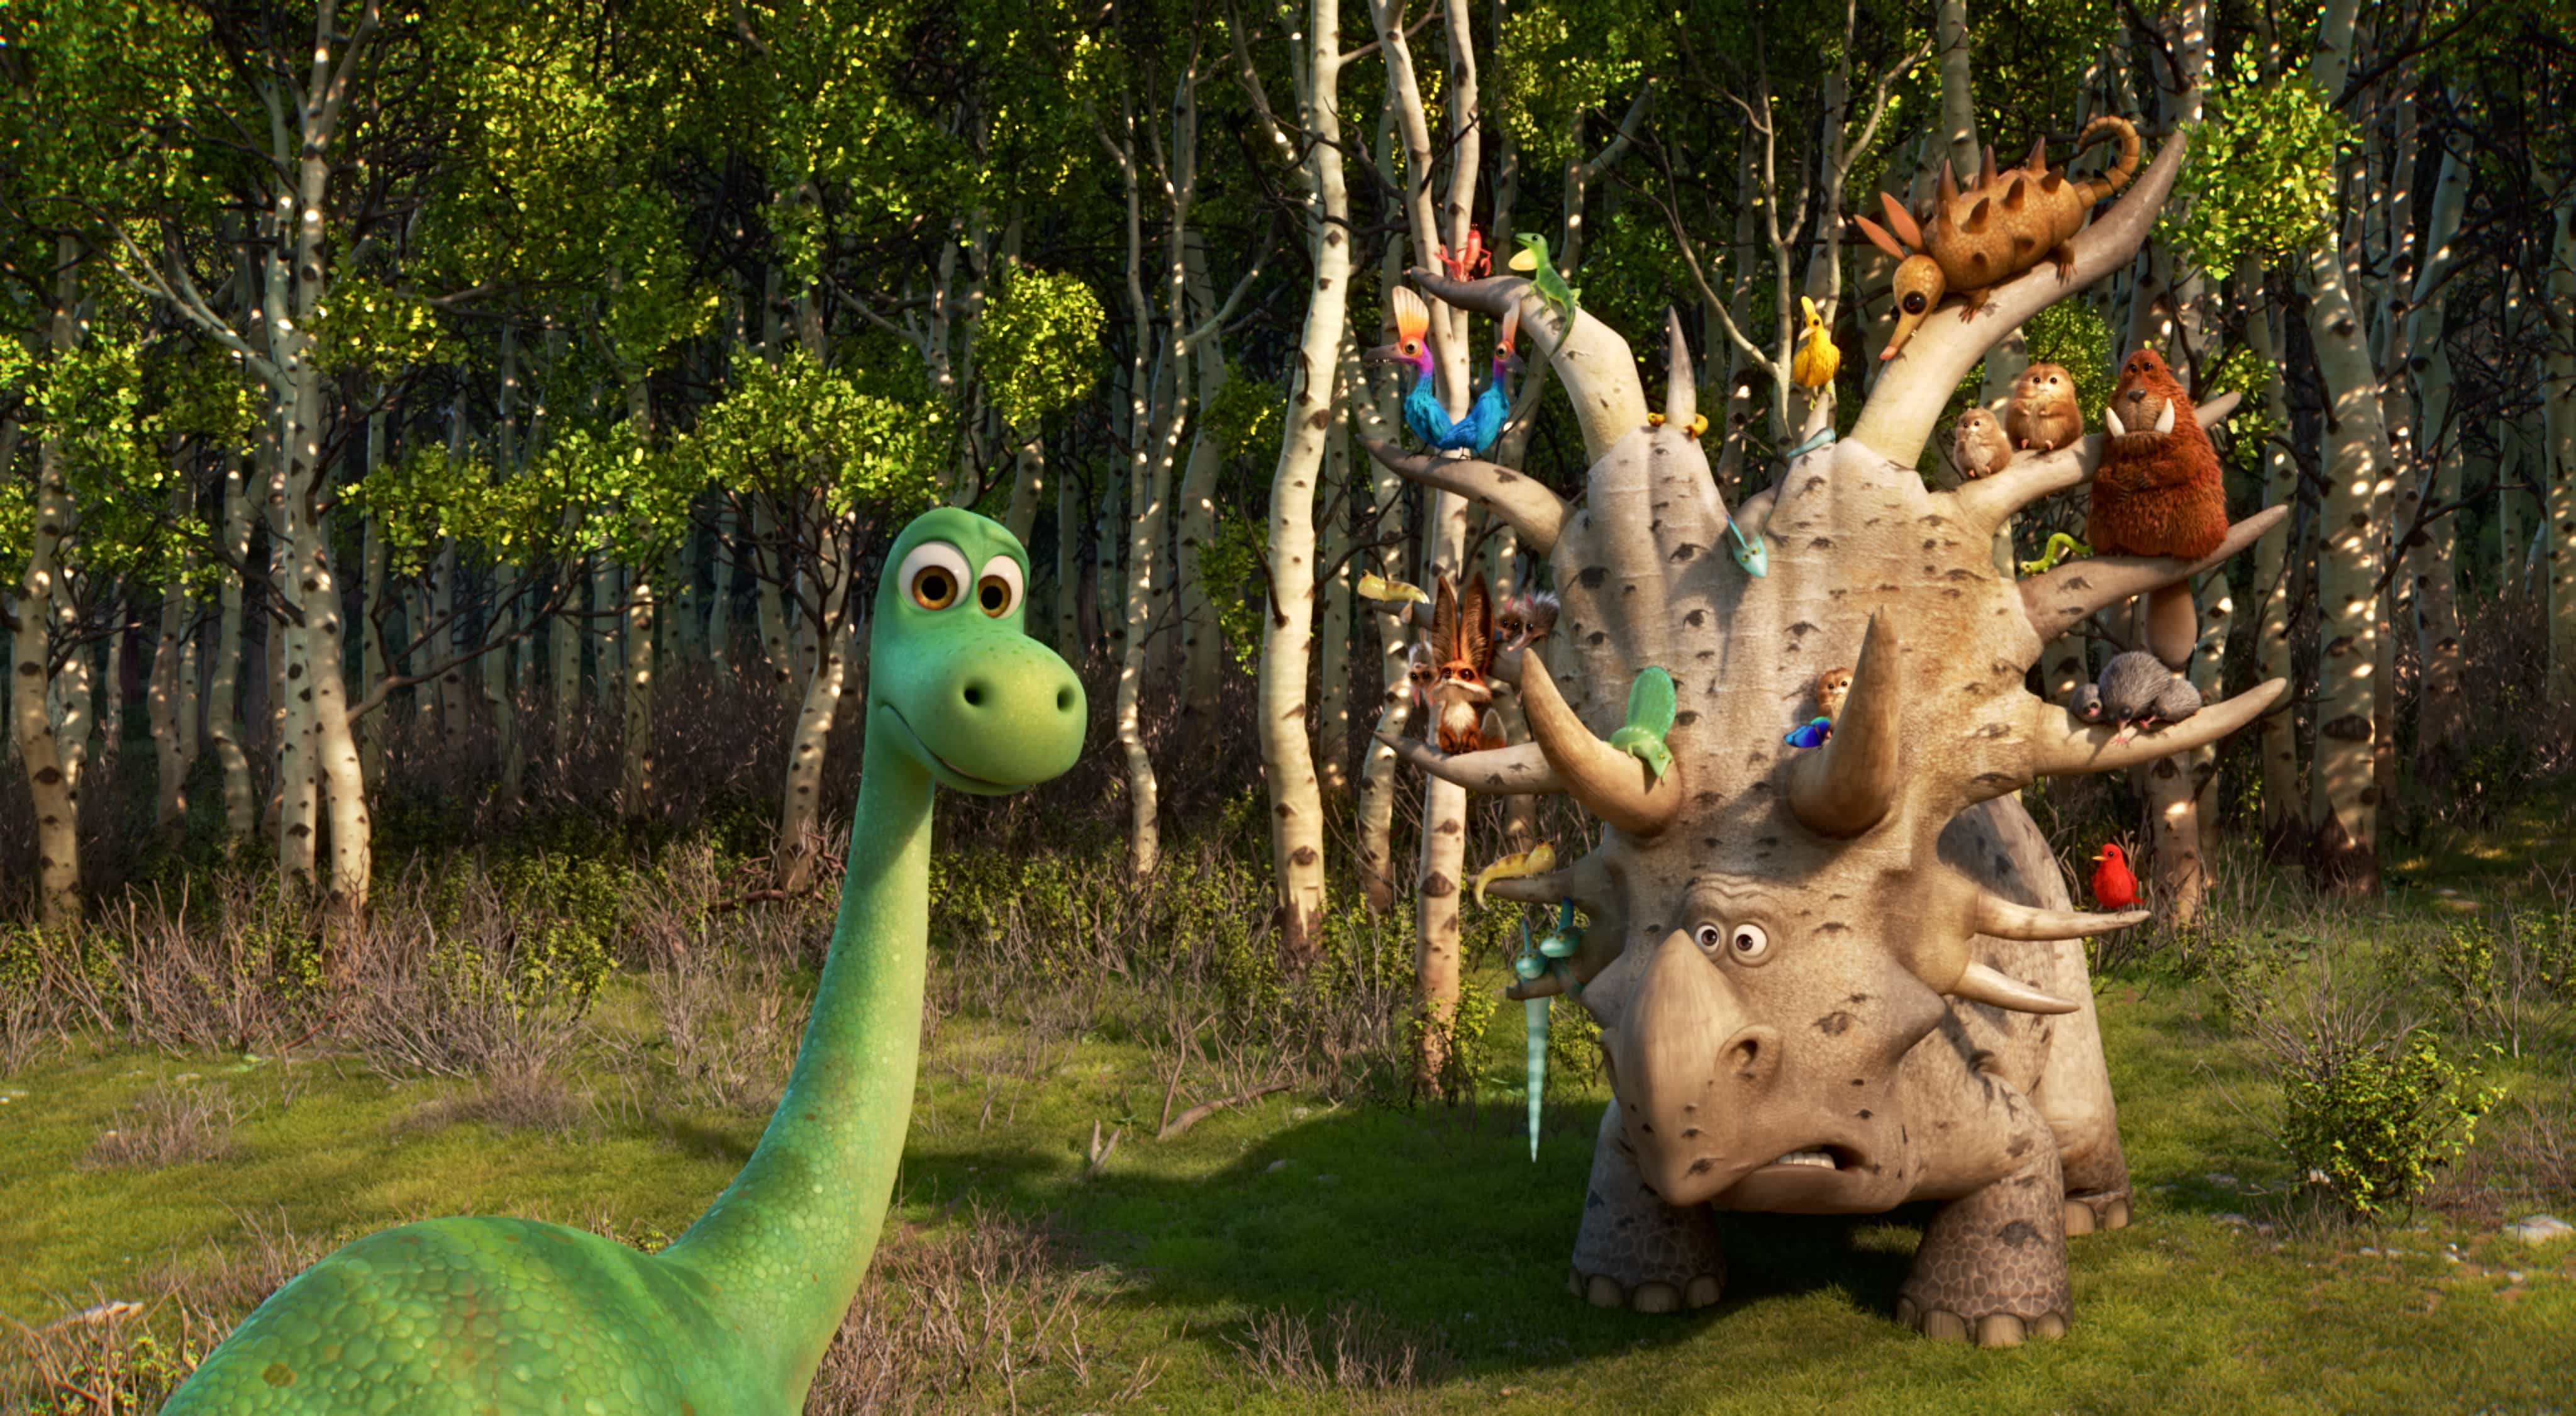 Your Kids Will Love These Fun and Free The Good Dinosaur Activities